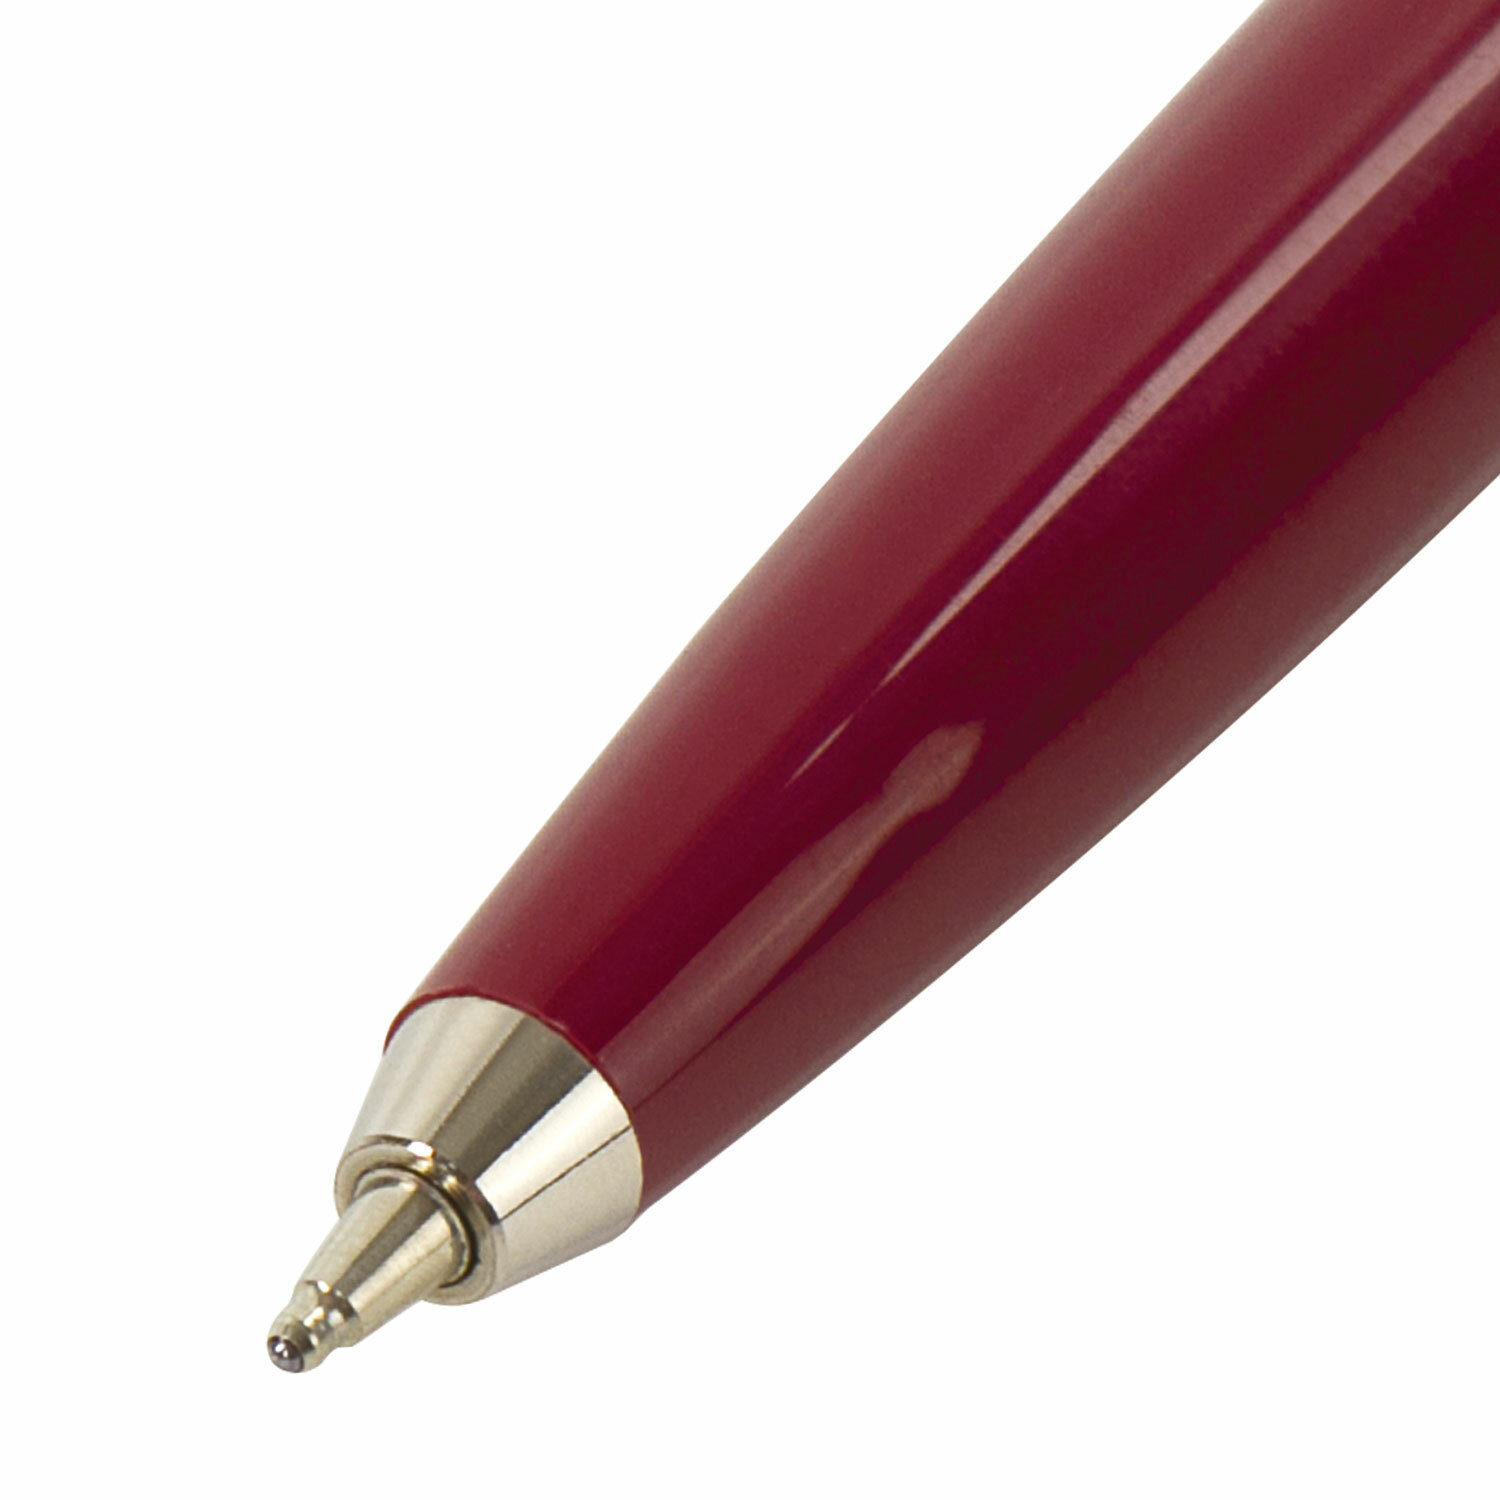 Vinyl Wrap Air Release Pen Market Future Aspect Analysis and Current Trends by 2023 to 2033